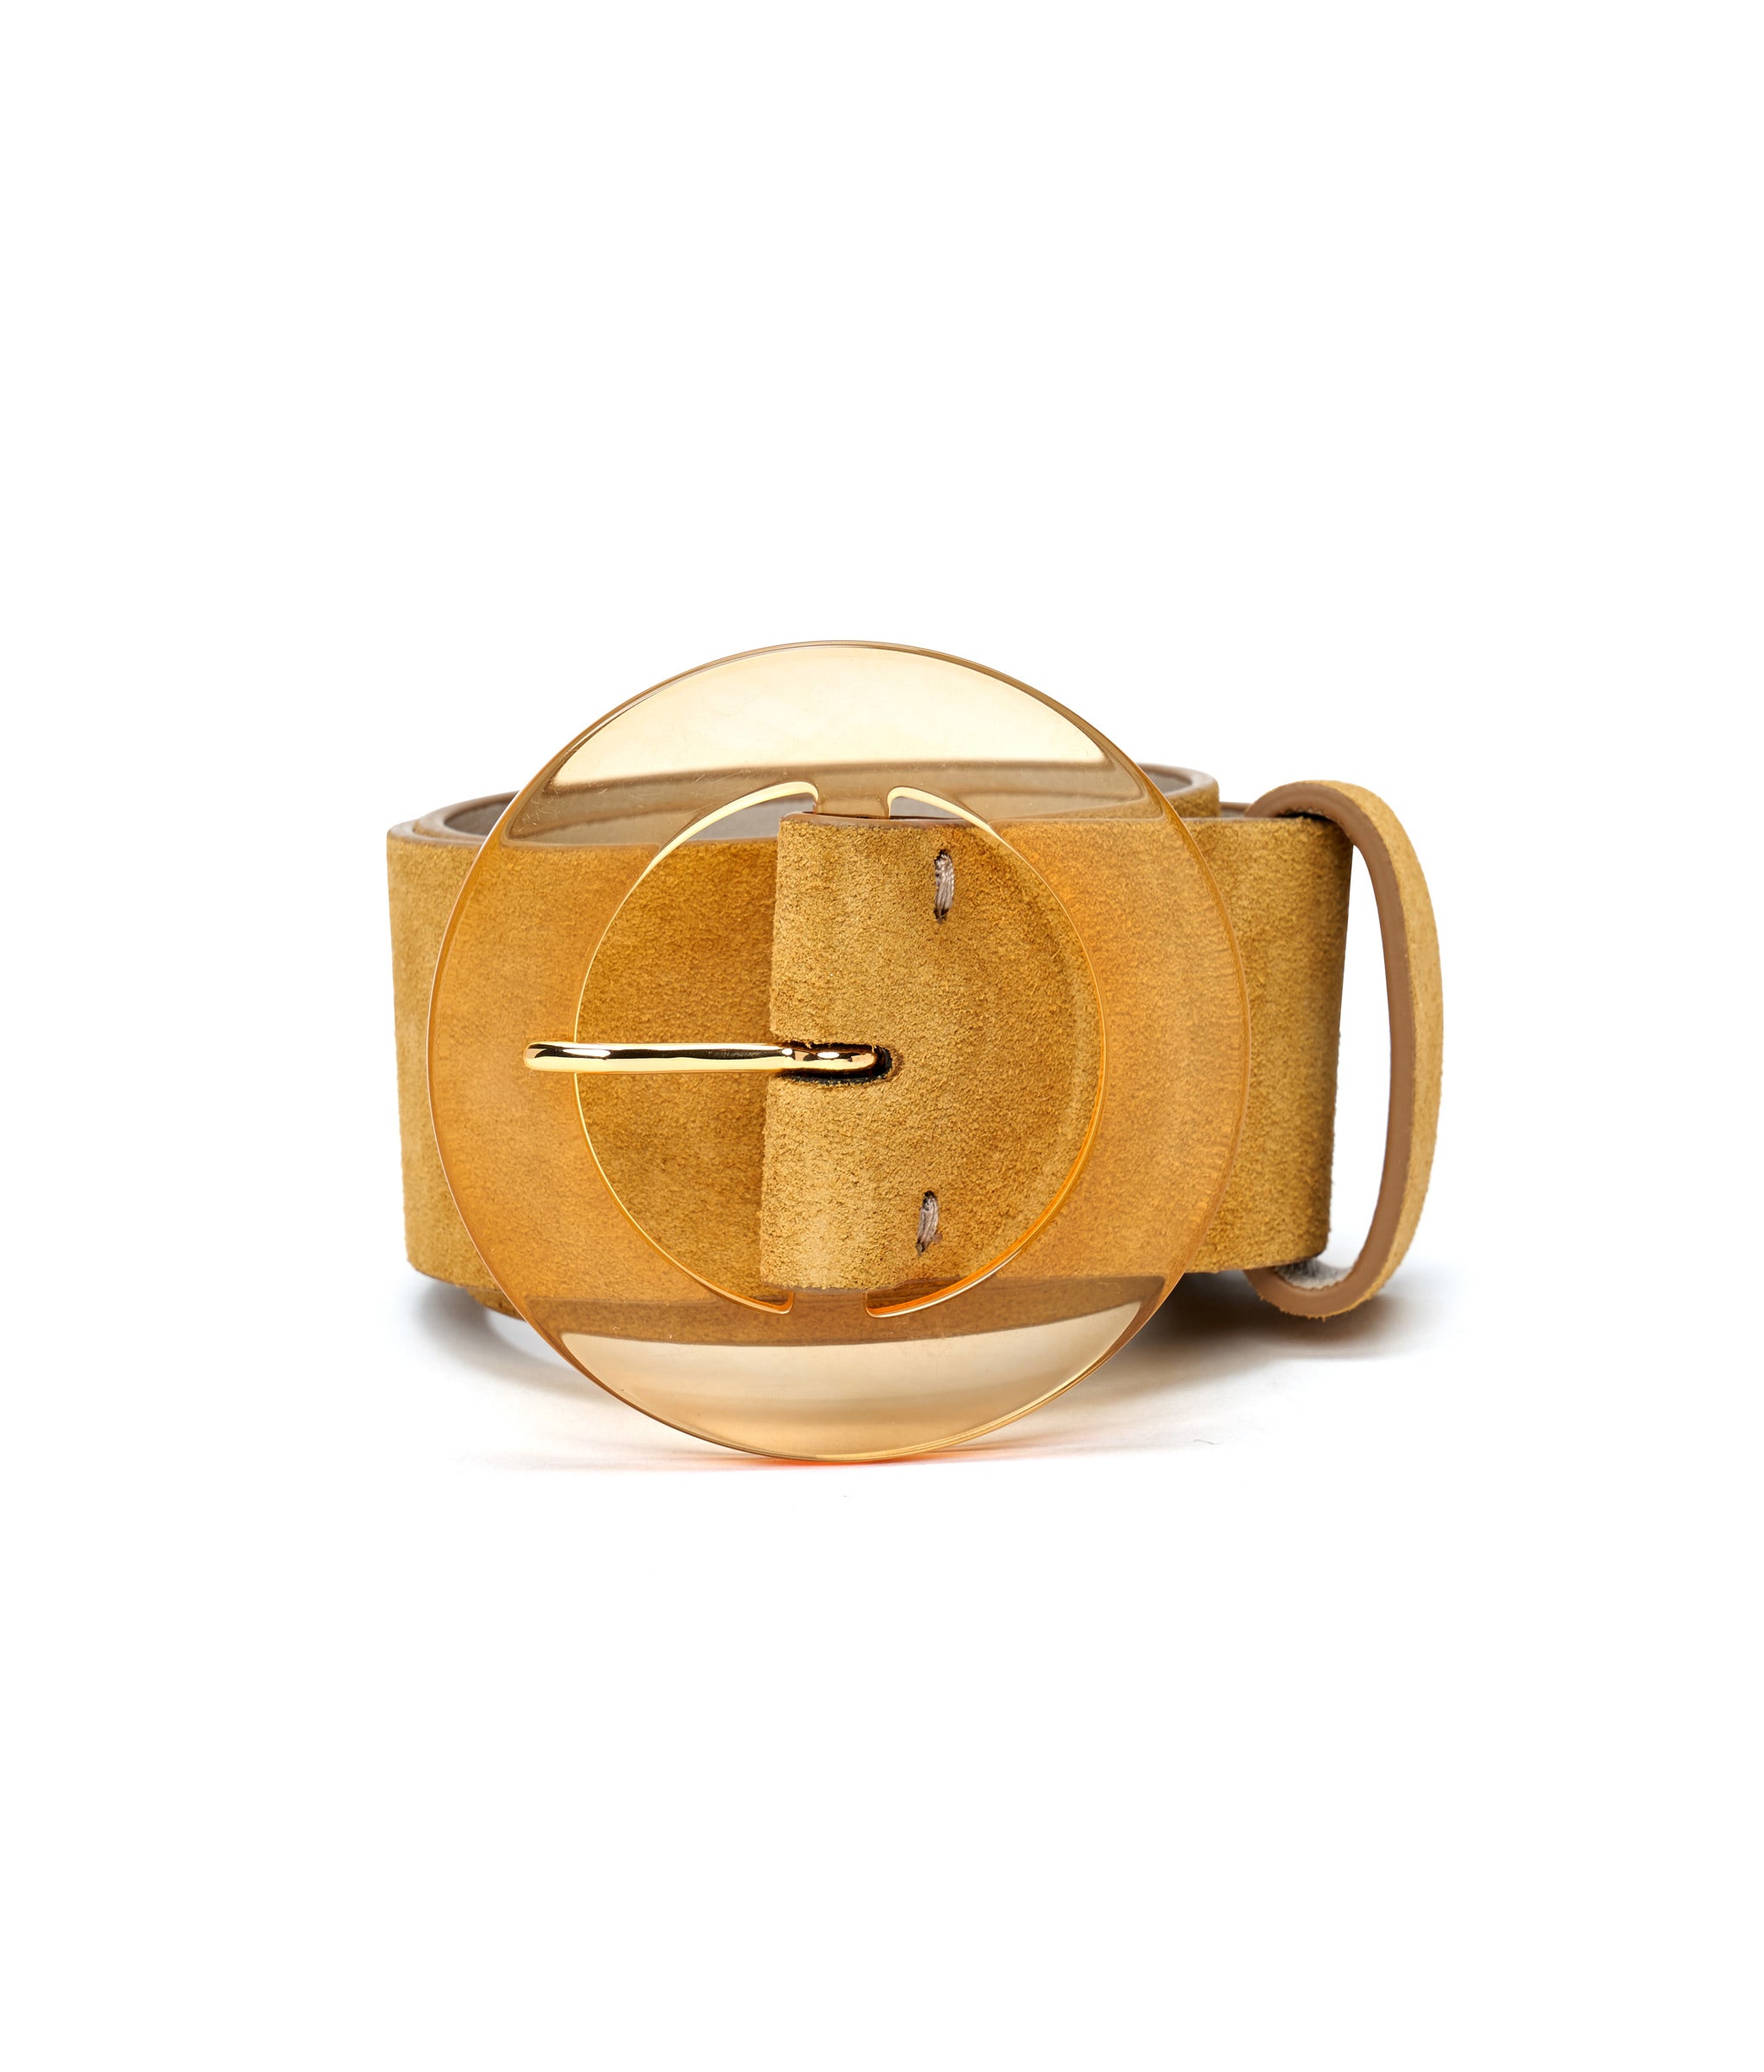 Louise Belt in Ochre. Yellow suede wide belt with translucent yellow circular resin buckle.